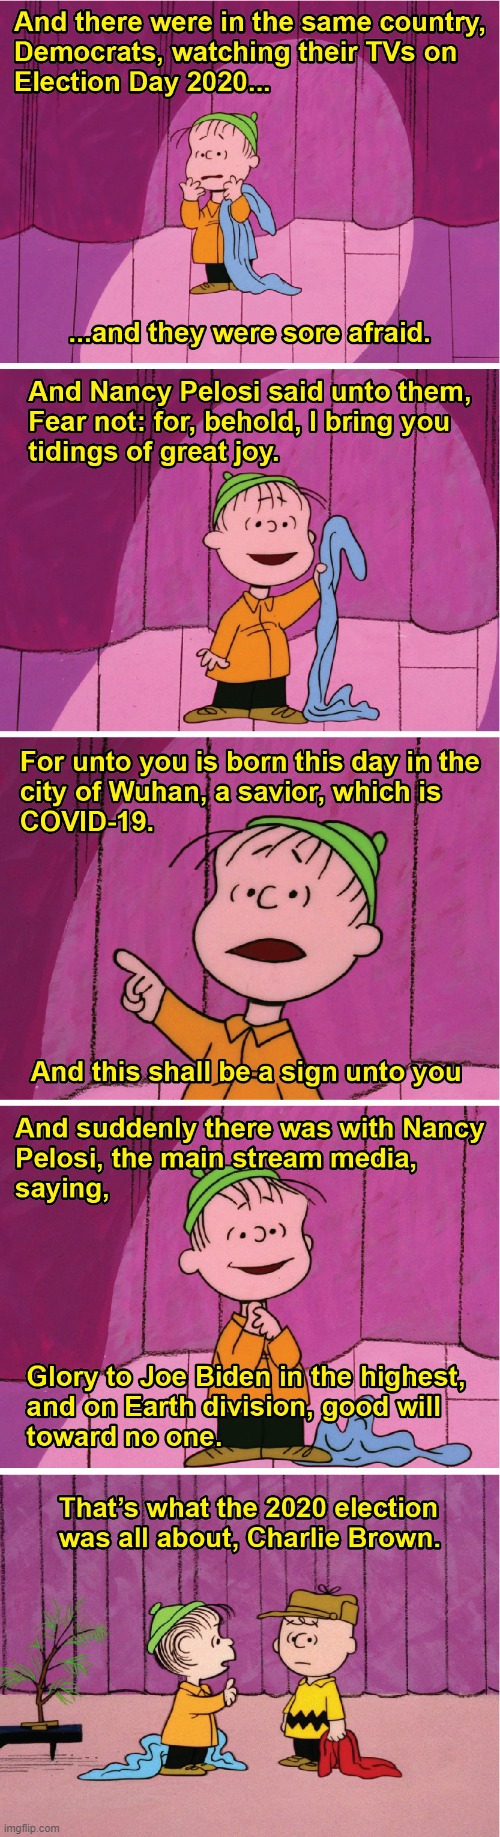 "Isn't there anyone who knows what Election Day 2020 was all about!" | image tagged in charlie brown,linus,christmas,election day 2020,memes,covid-19 | made w/ Imgflip meme maker